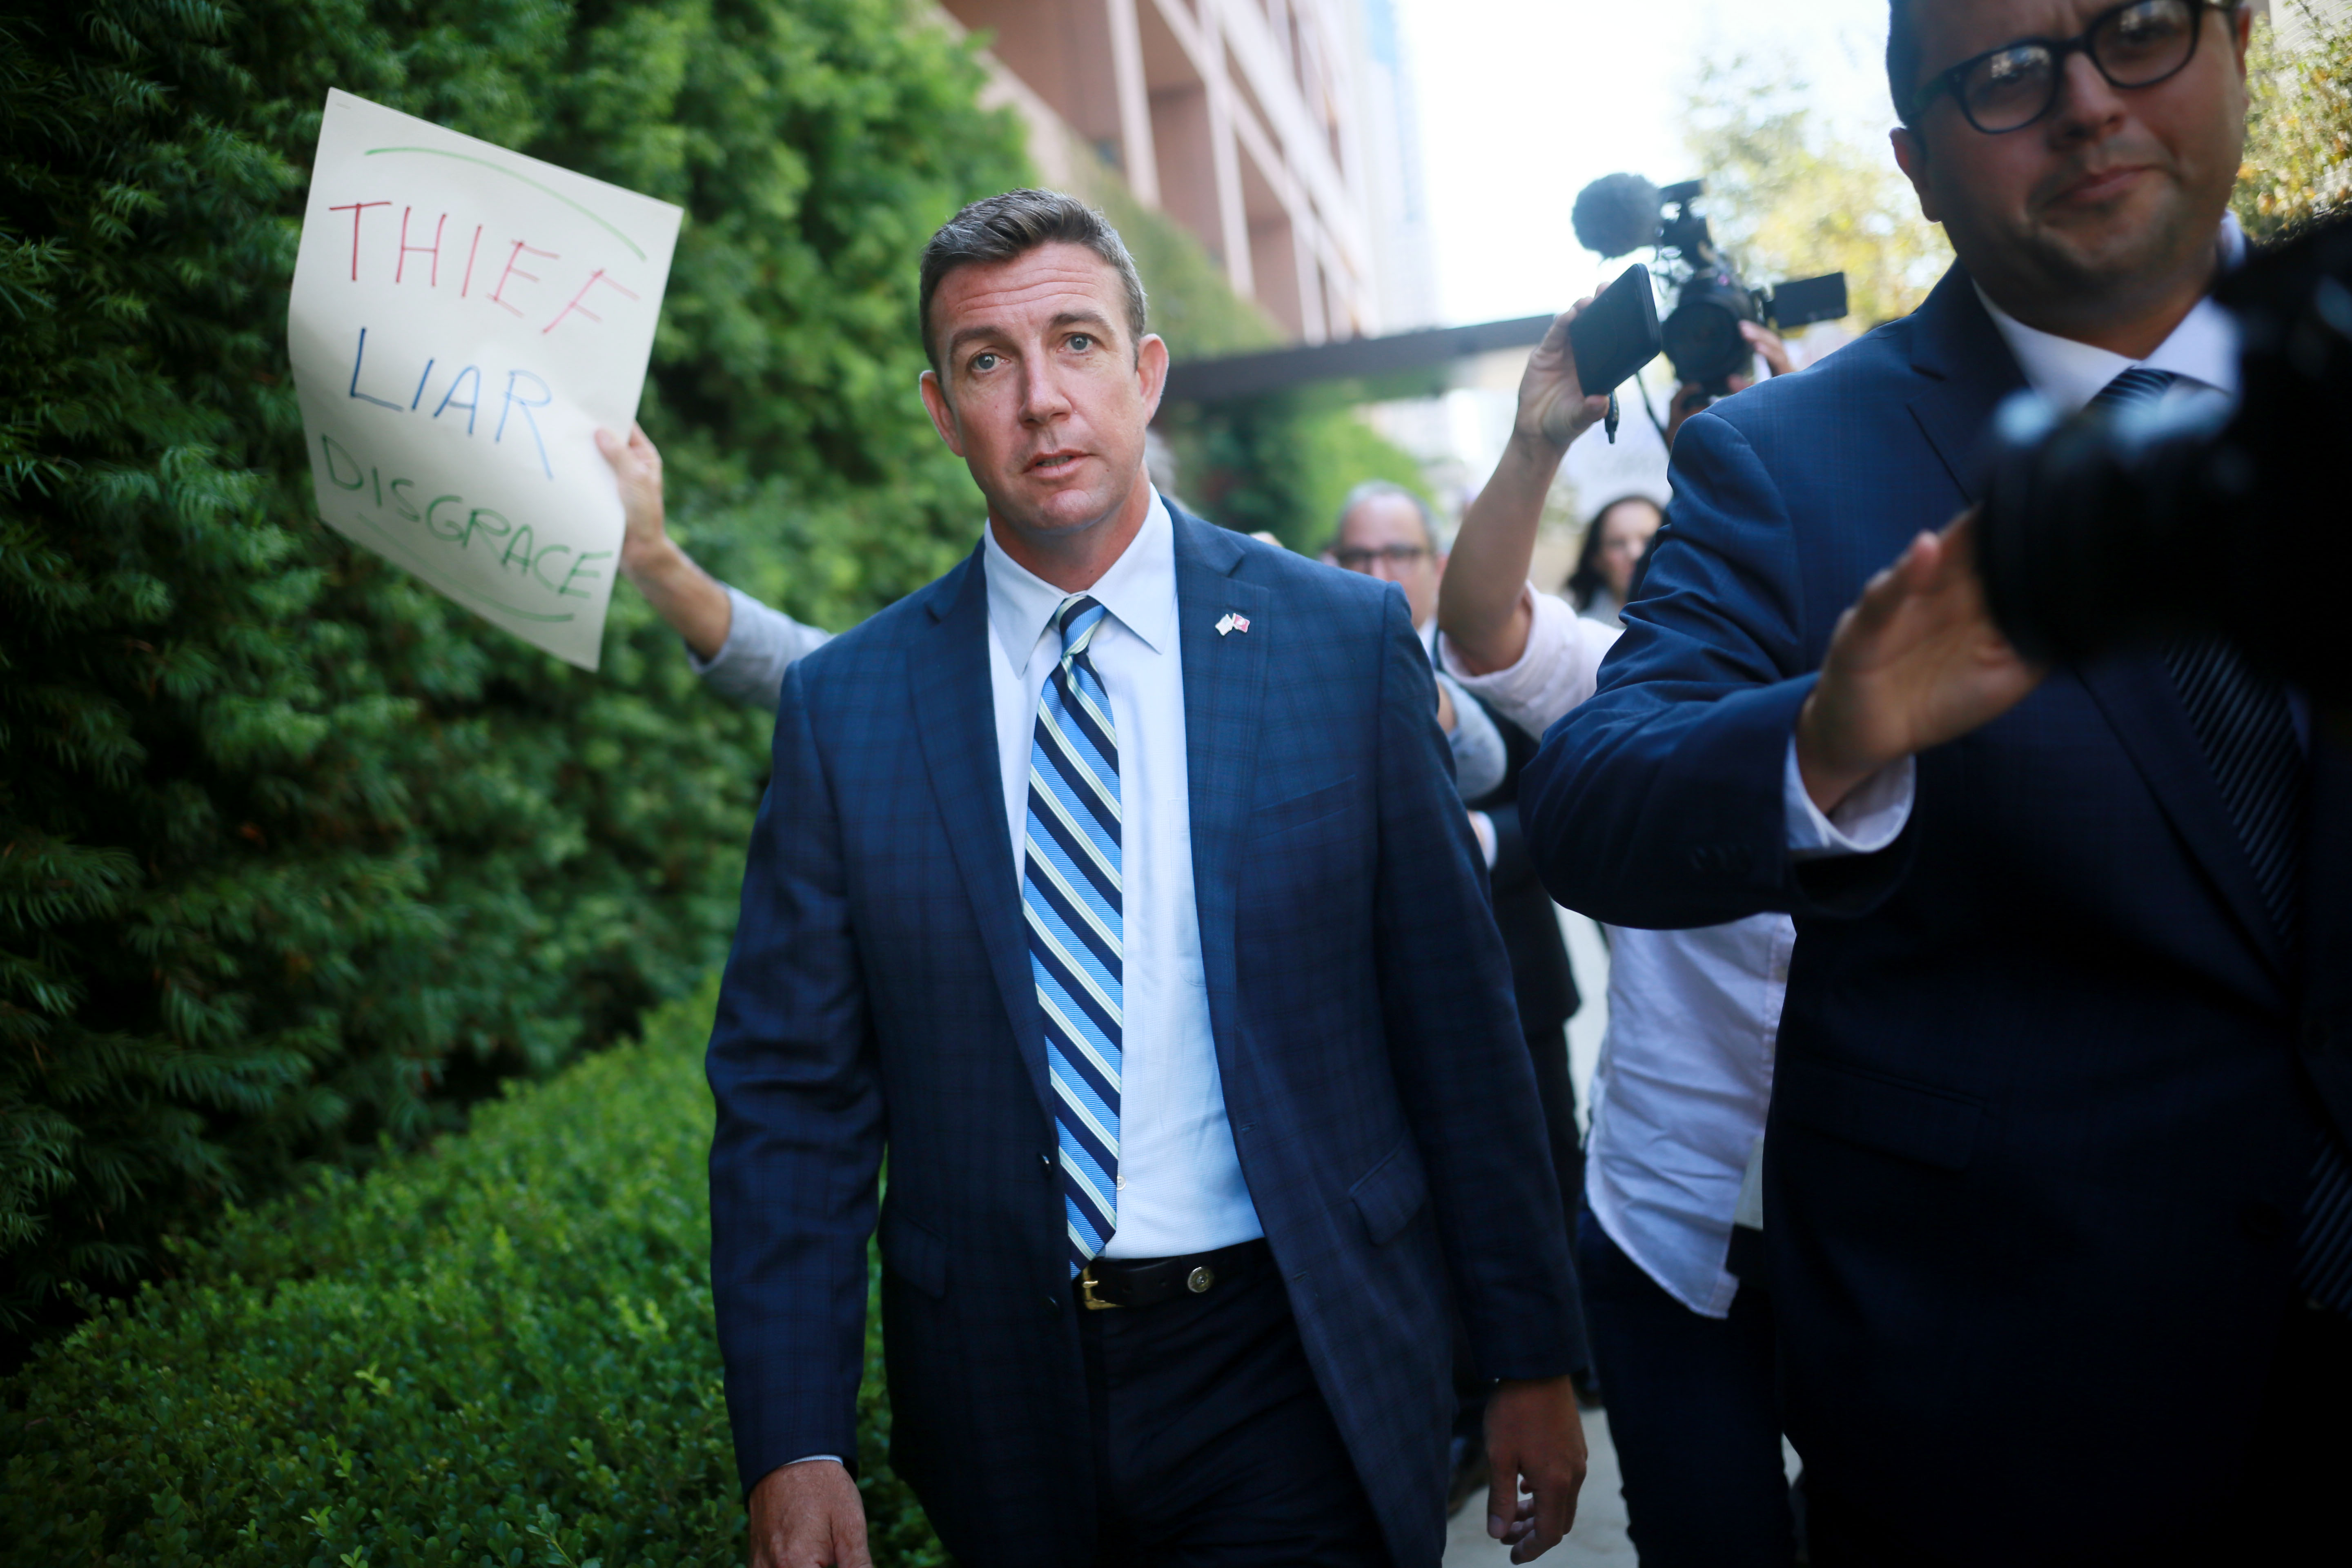 SAN DIEGO, CA - AUGUST 23: Congressman Duncan Hunter walks out of the San Diego Federal Courthouse after an arraignment hearing on Thursday, August 23, 2018 in San Diego, CA. Hunter and his wife Margaret, who pled "not guilty", are accused of using more than 250,000 in campaign funds for personal use. (Photo by Sandy Huffaker/Getty Images)